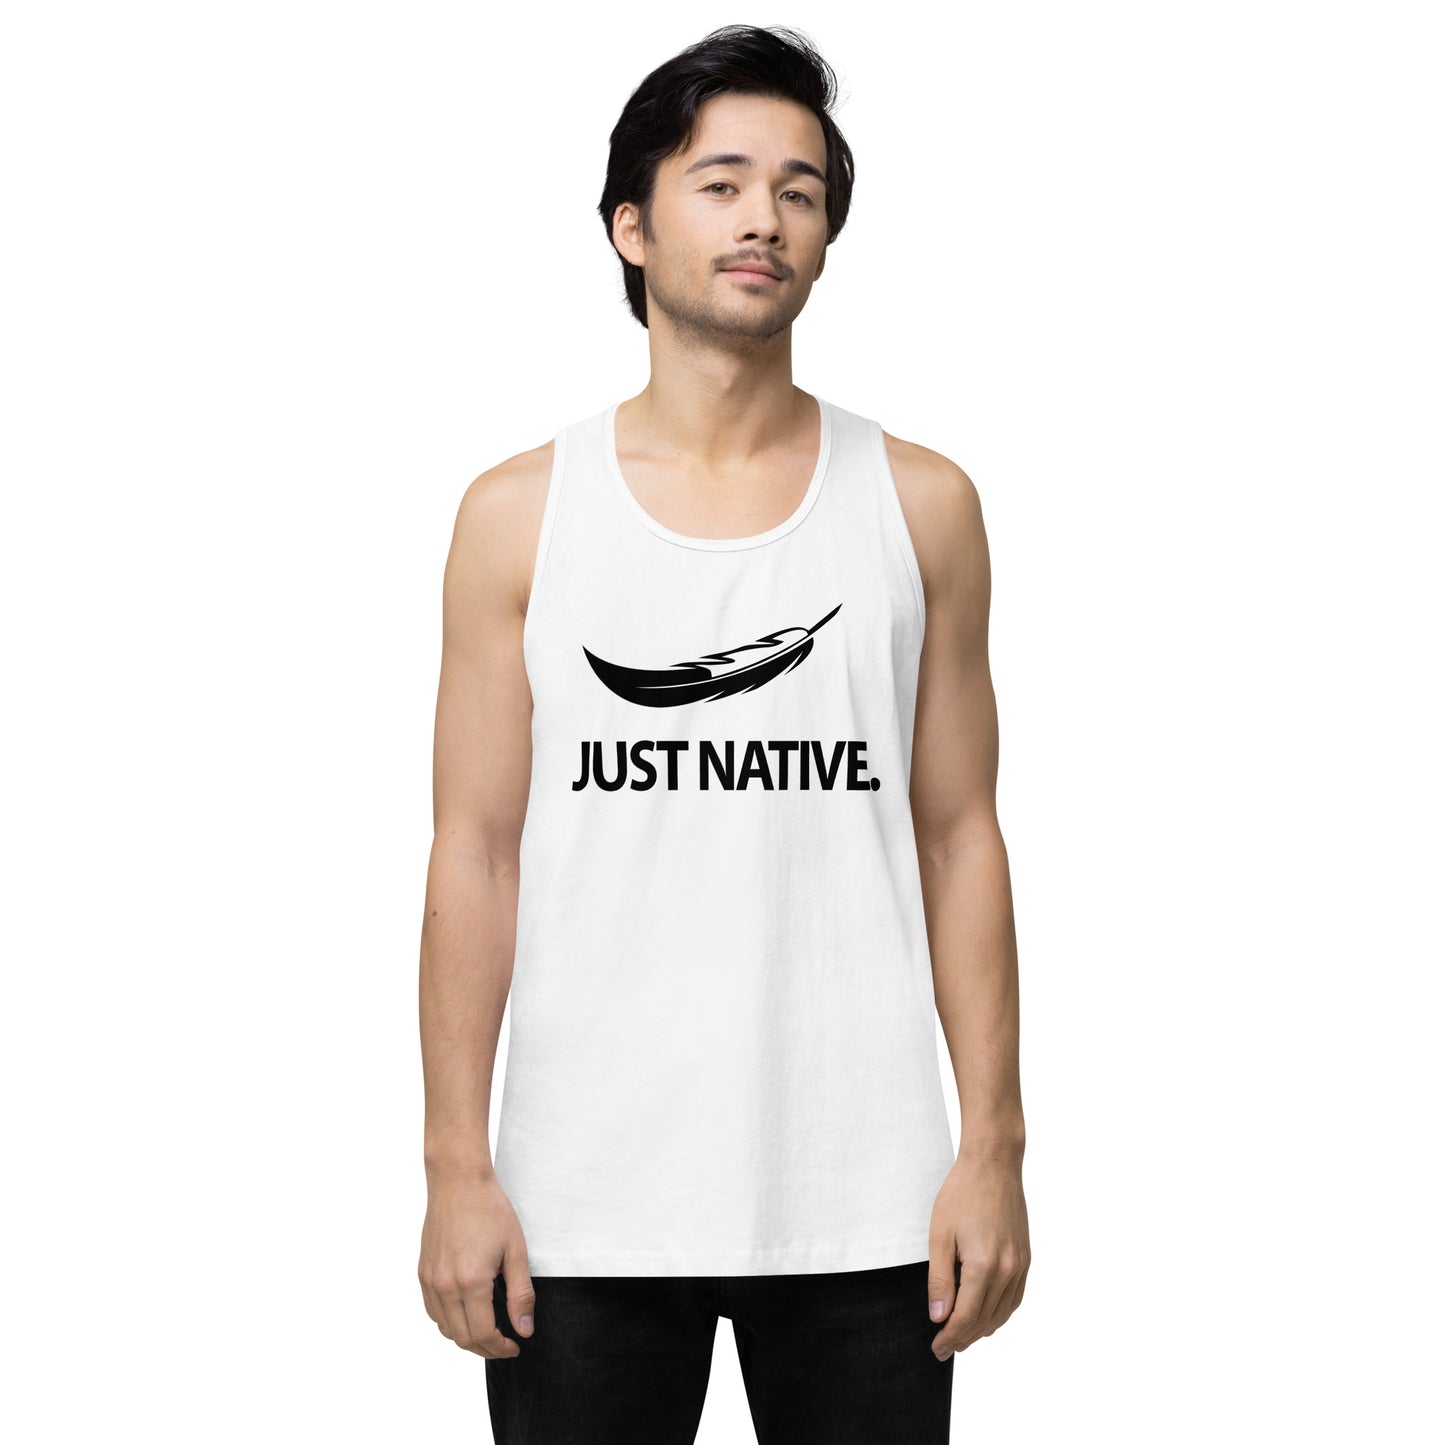 Just Native